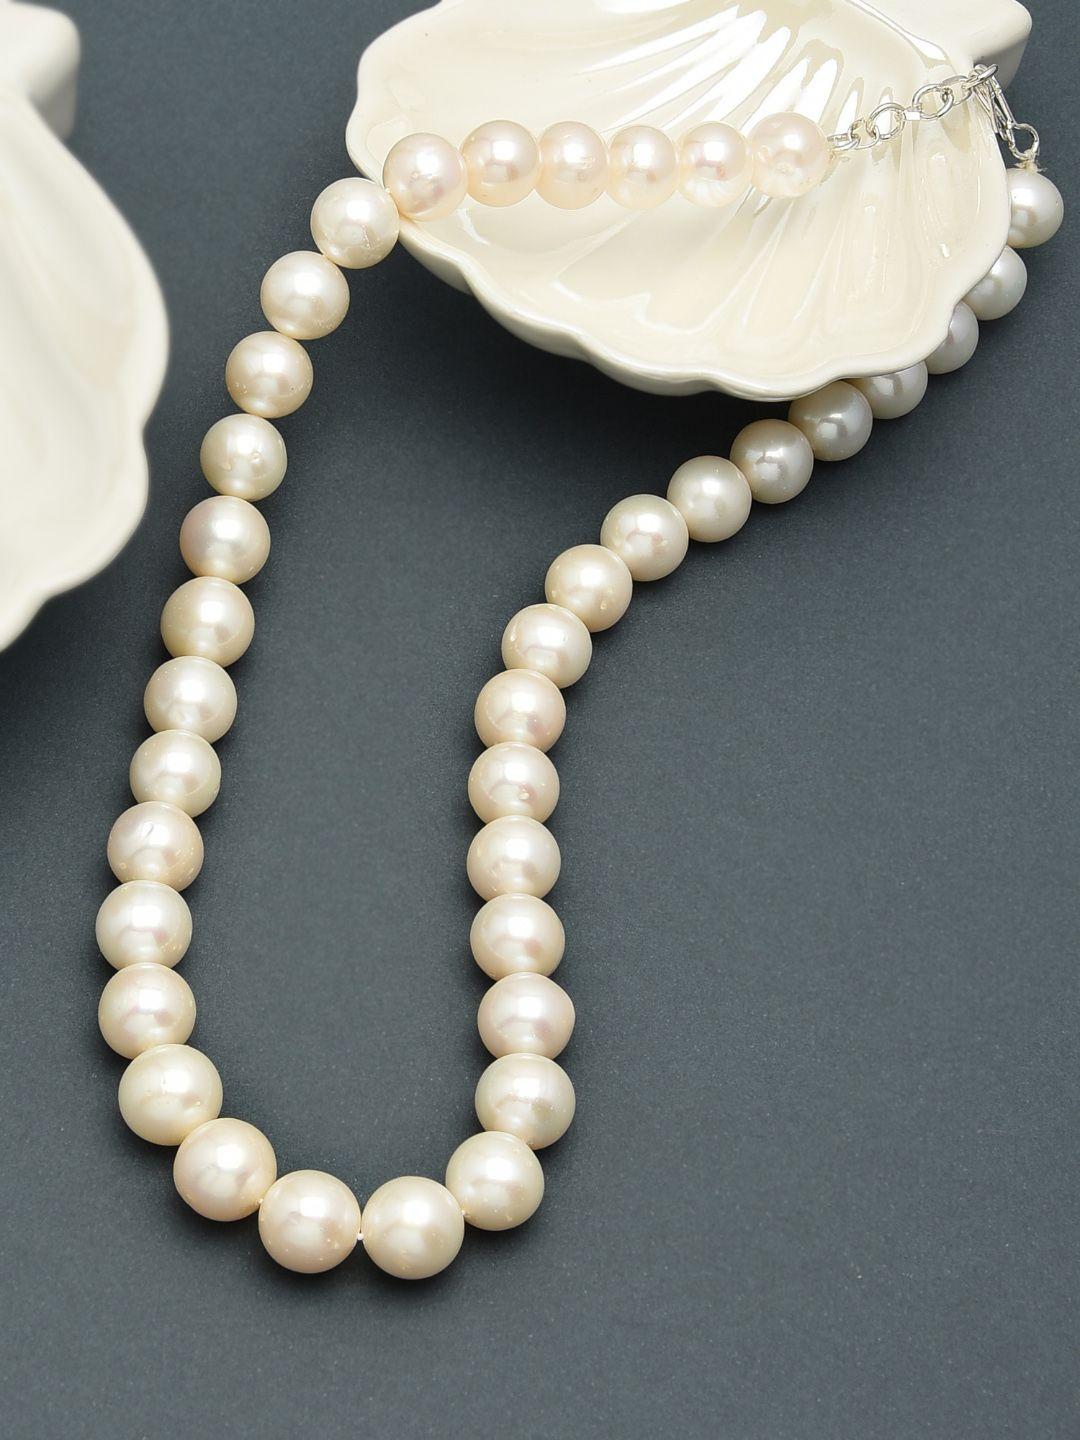 zaveri pearls fresh water round pearls 11-12mm aaa+ quality necklace